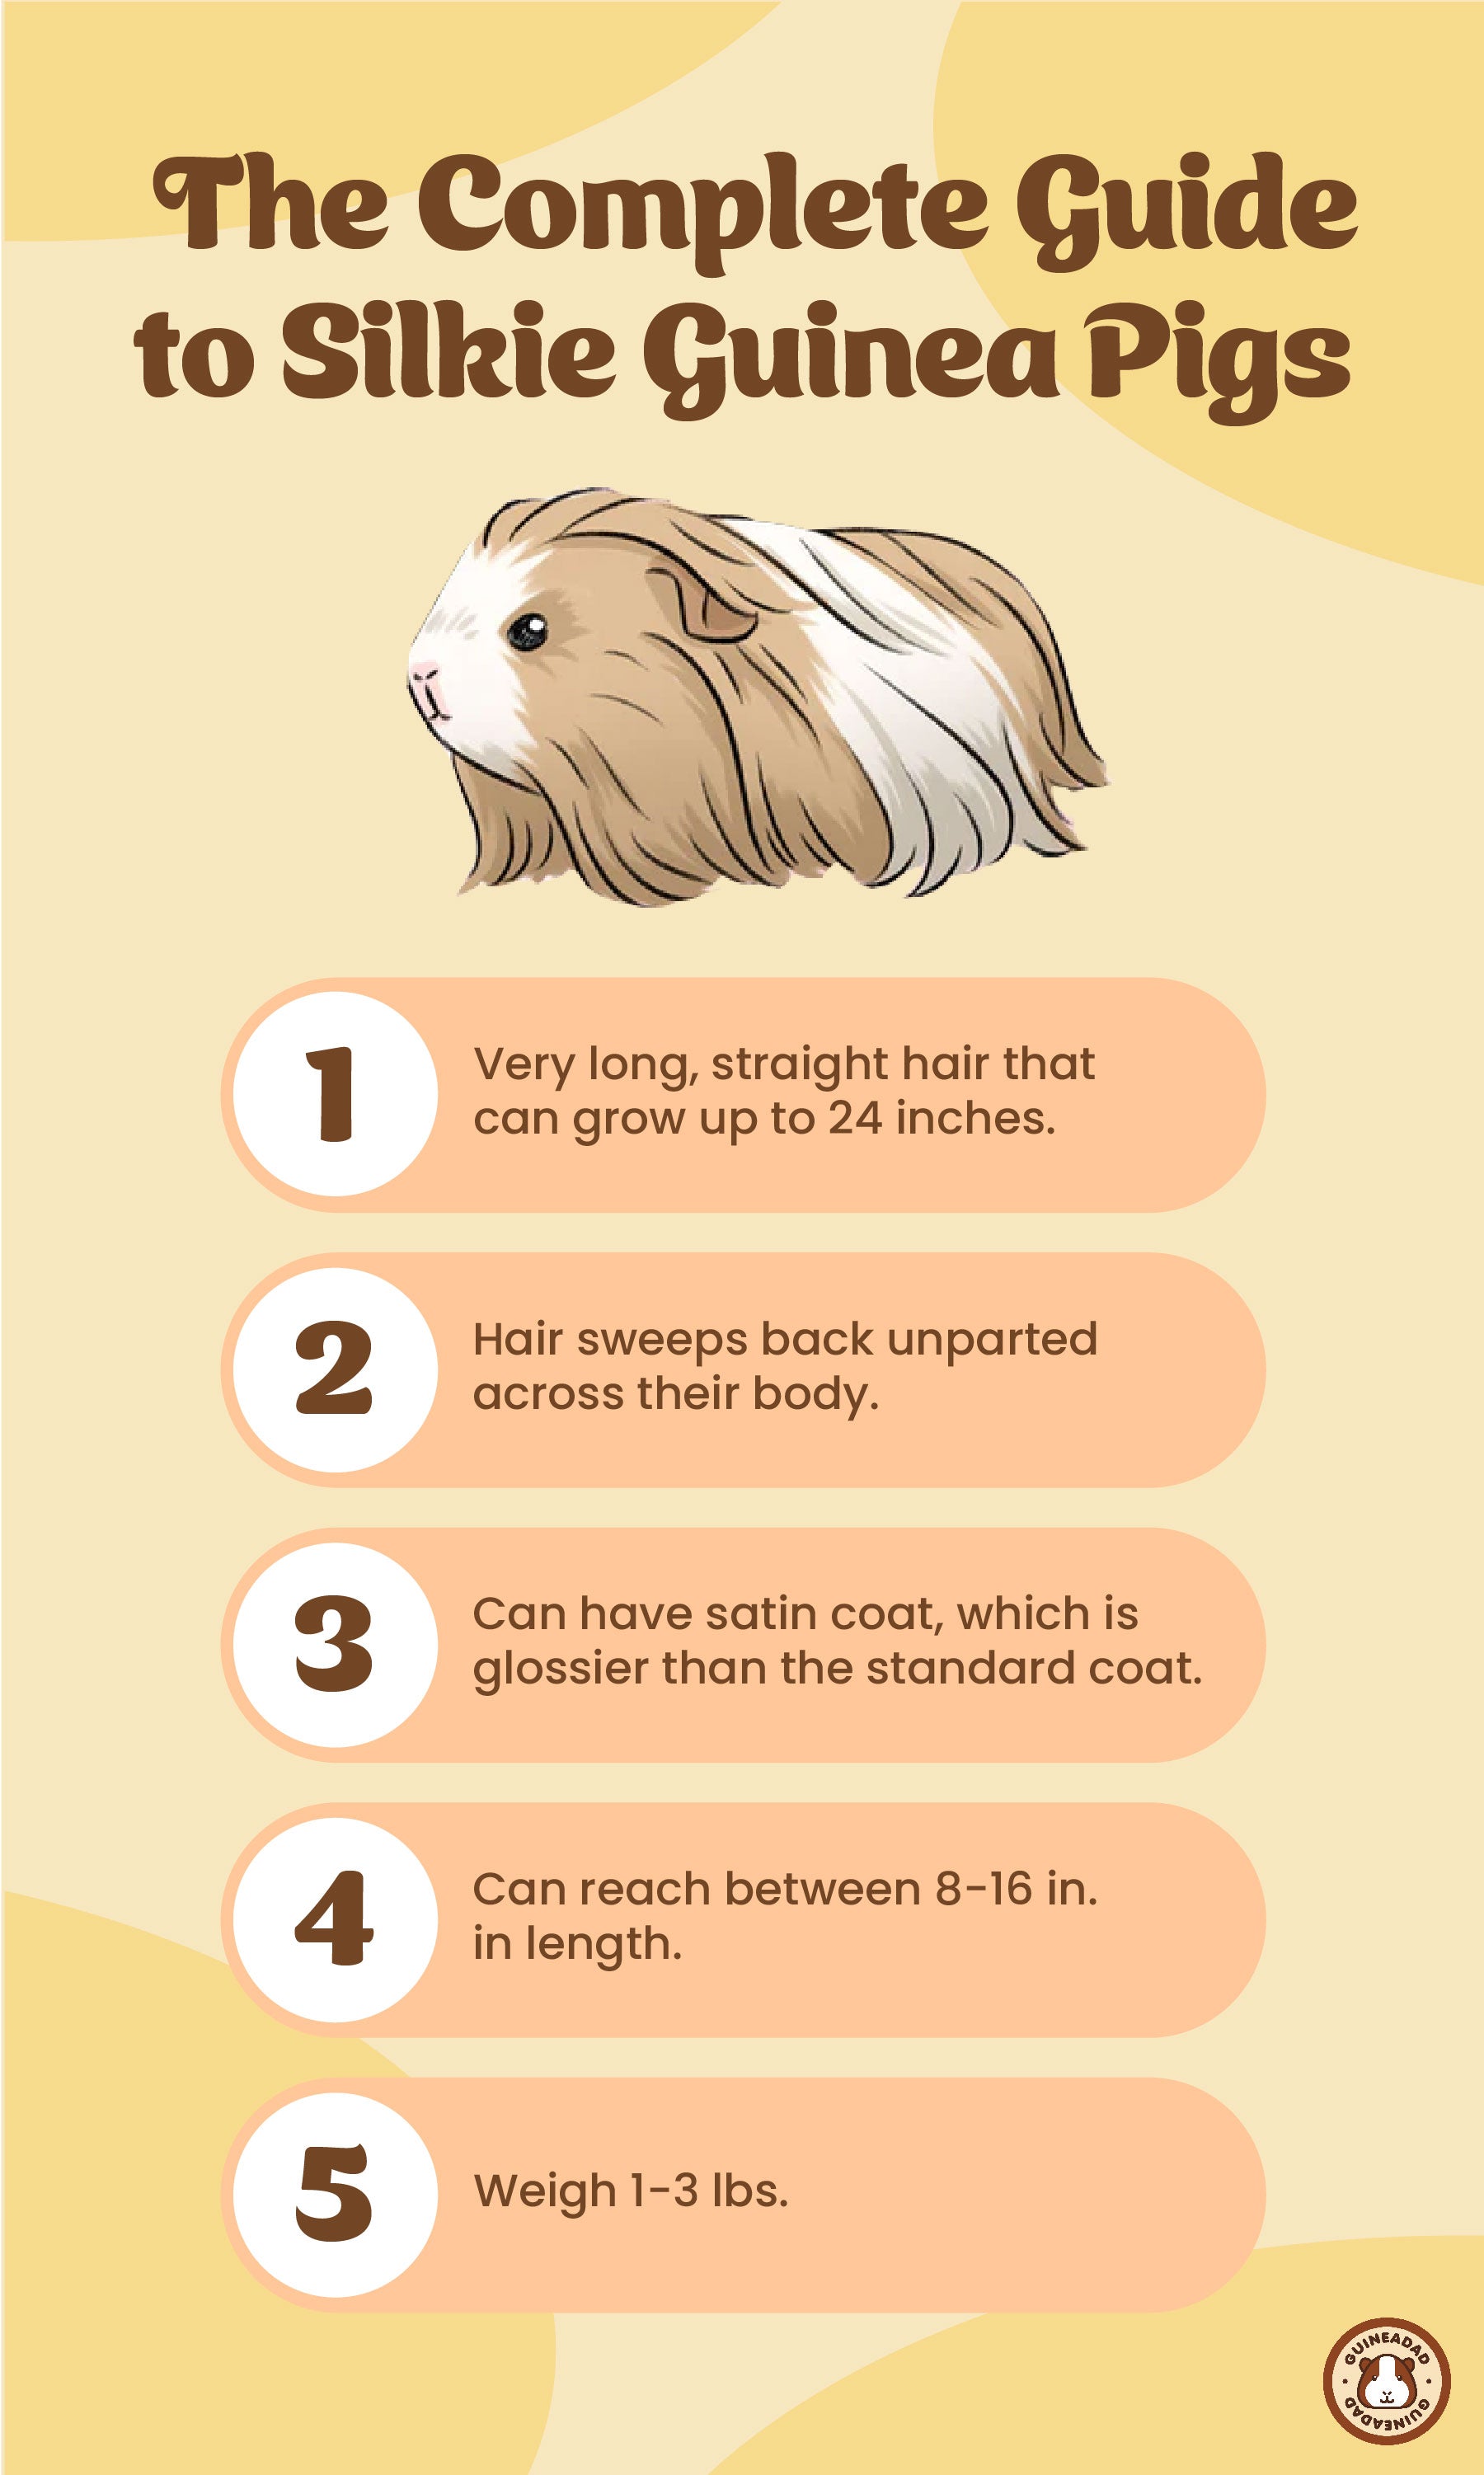 Infographic showing the physical characteristics of silkie guinea pigs